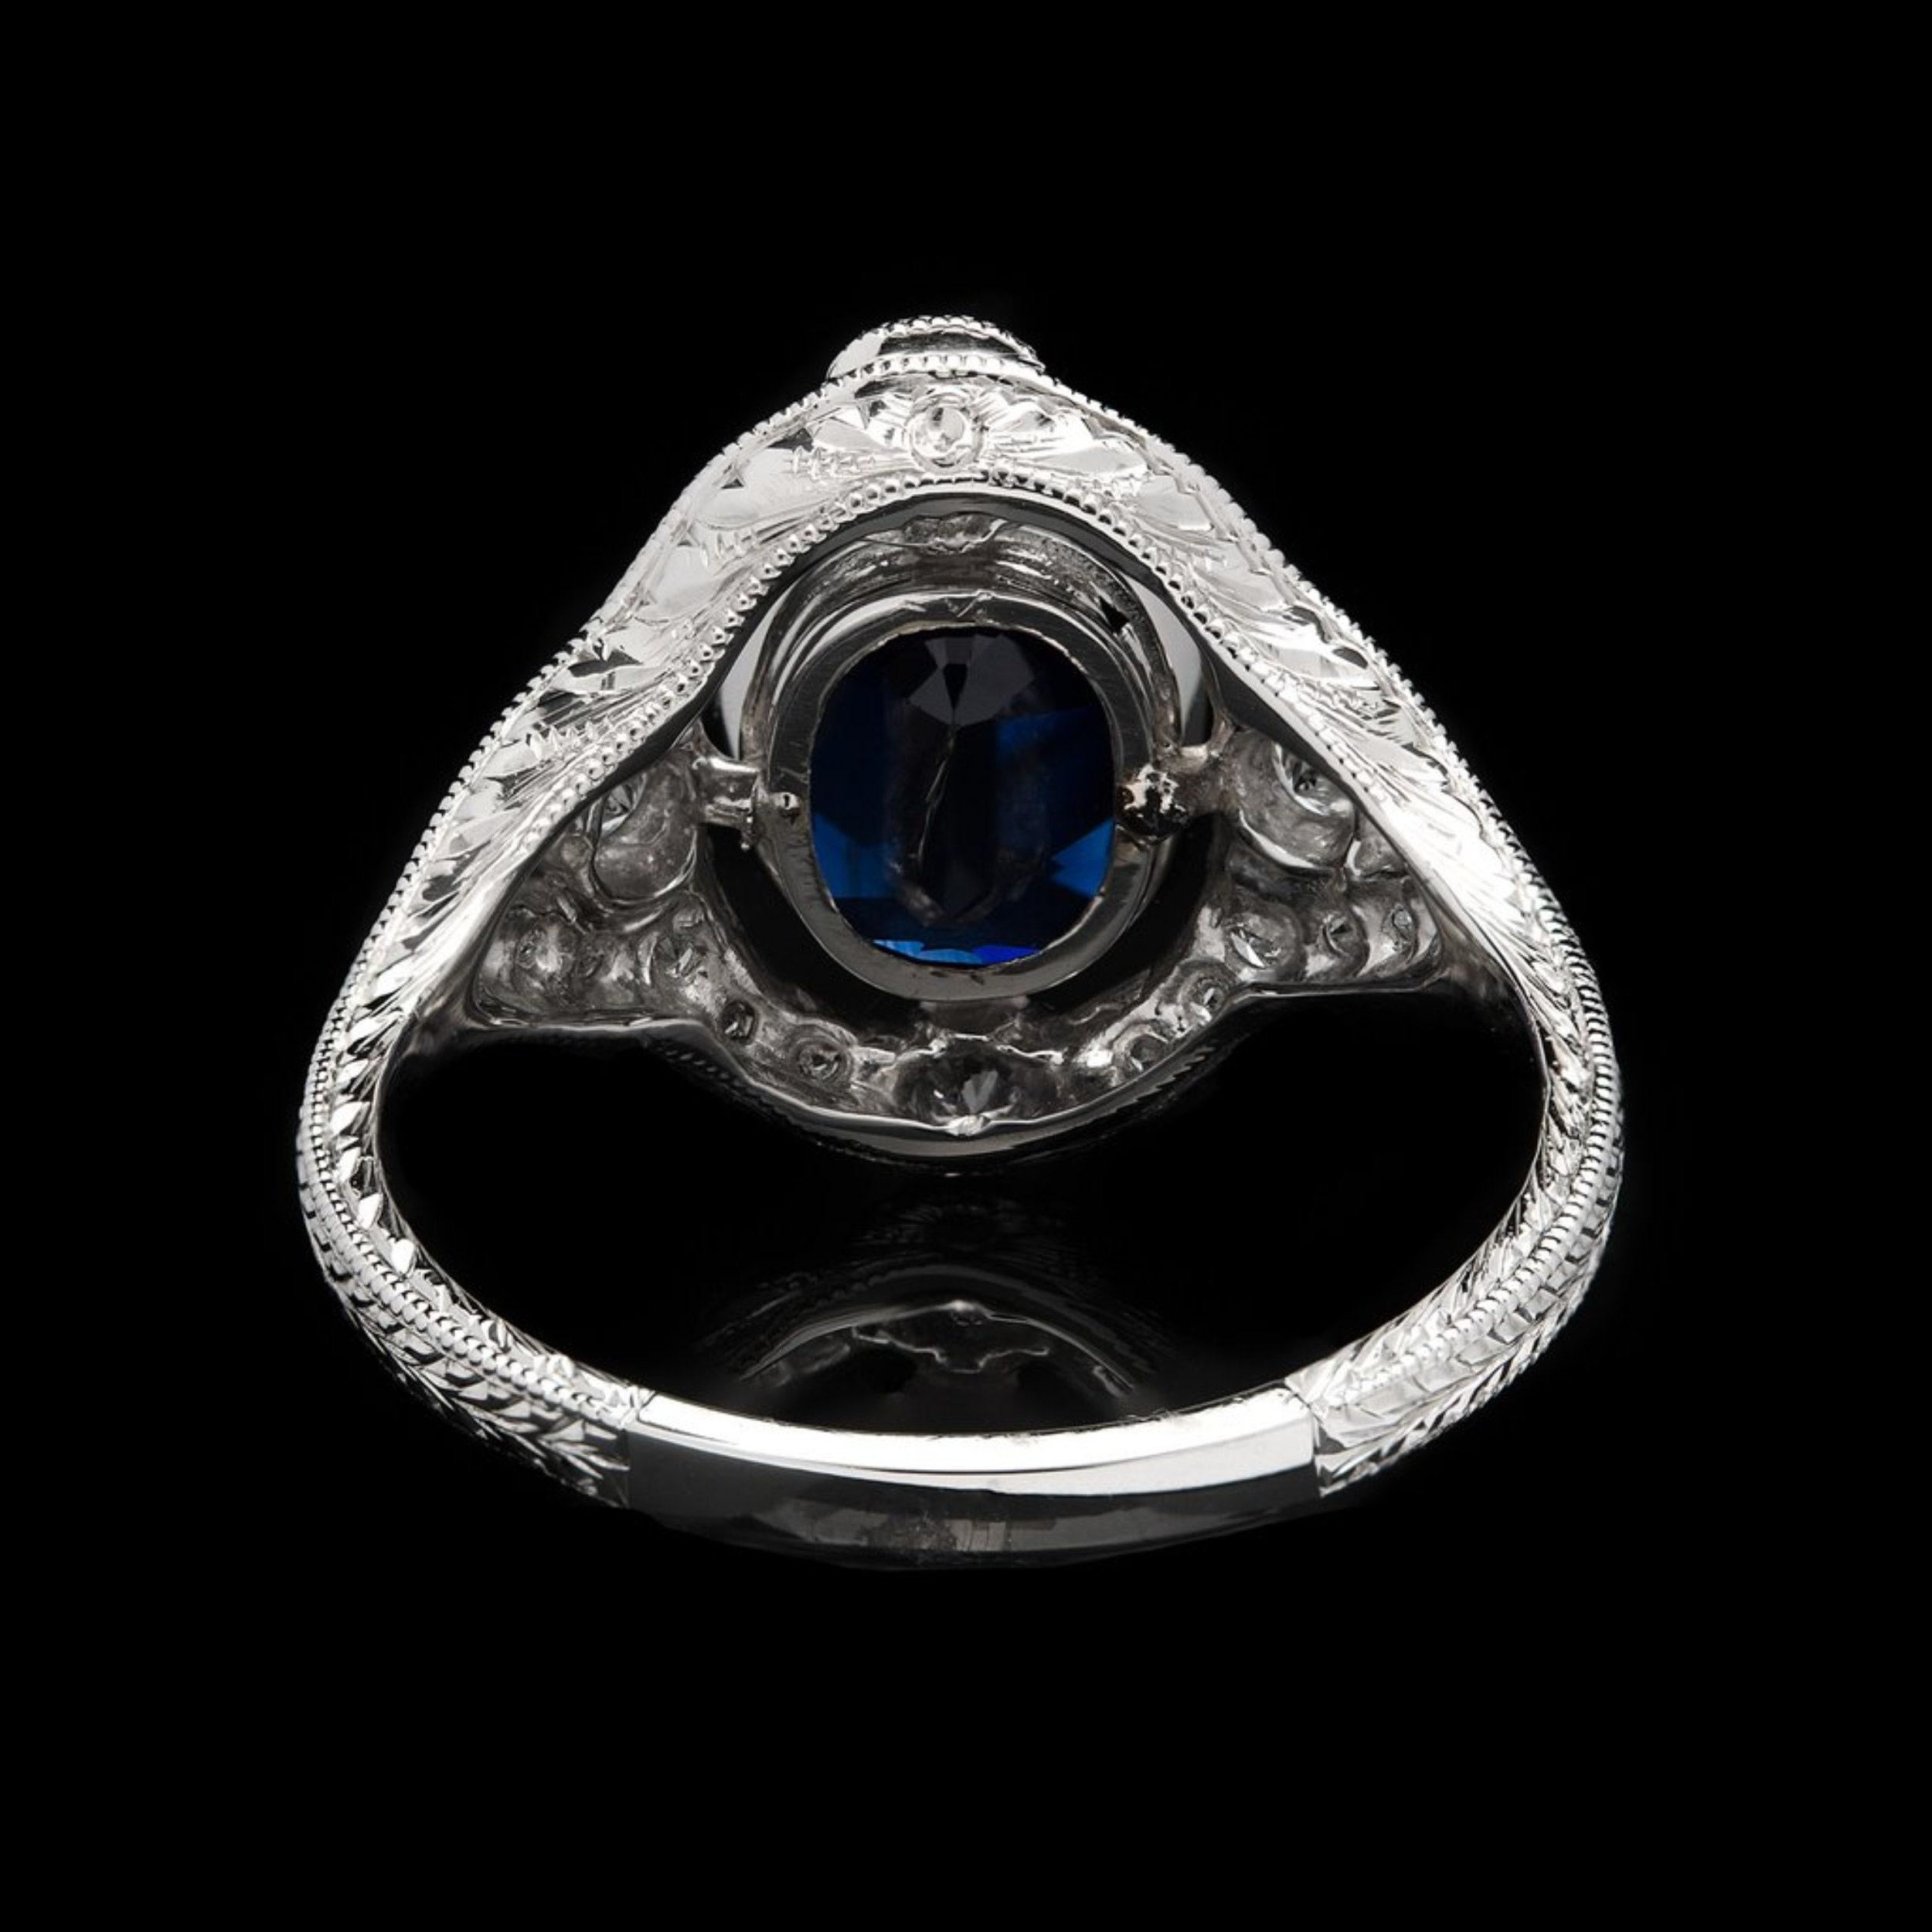 For Sale:  4 Carat Oval Cut Sapphire Diamond Engagement Ring, Blue Sapphire Wedding Ring 4